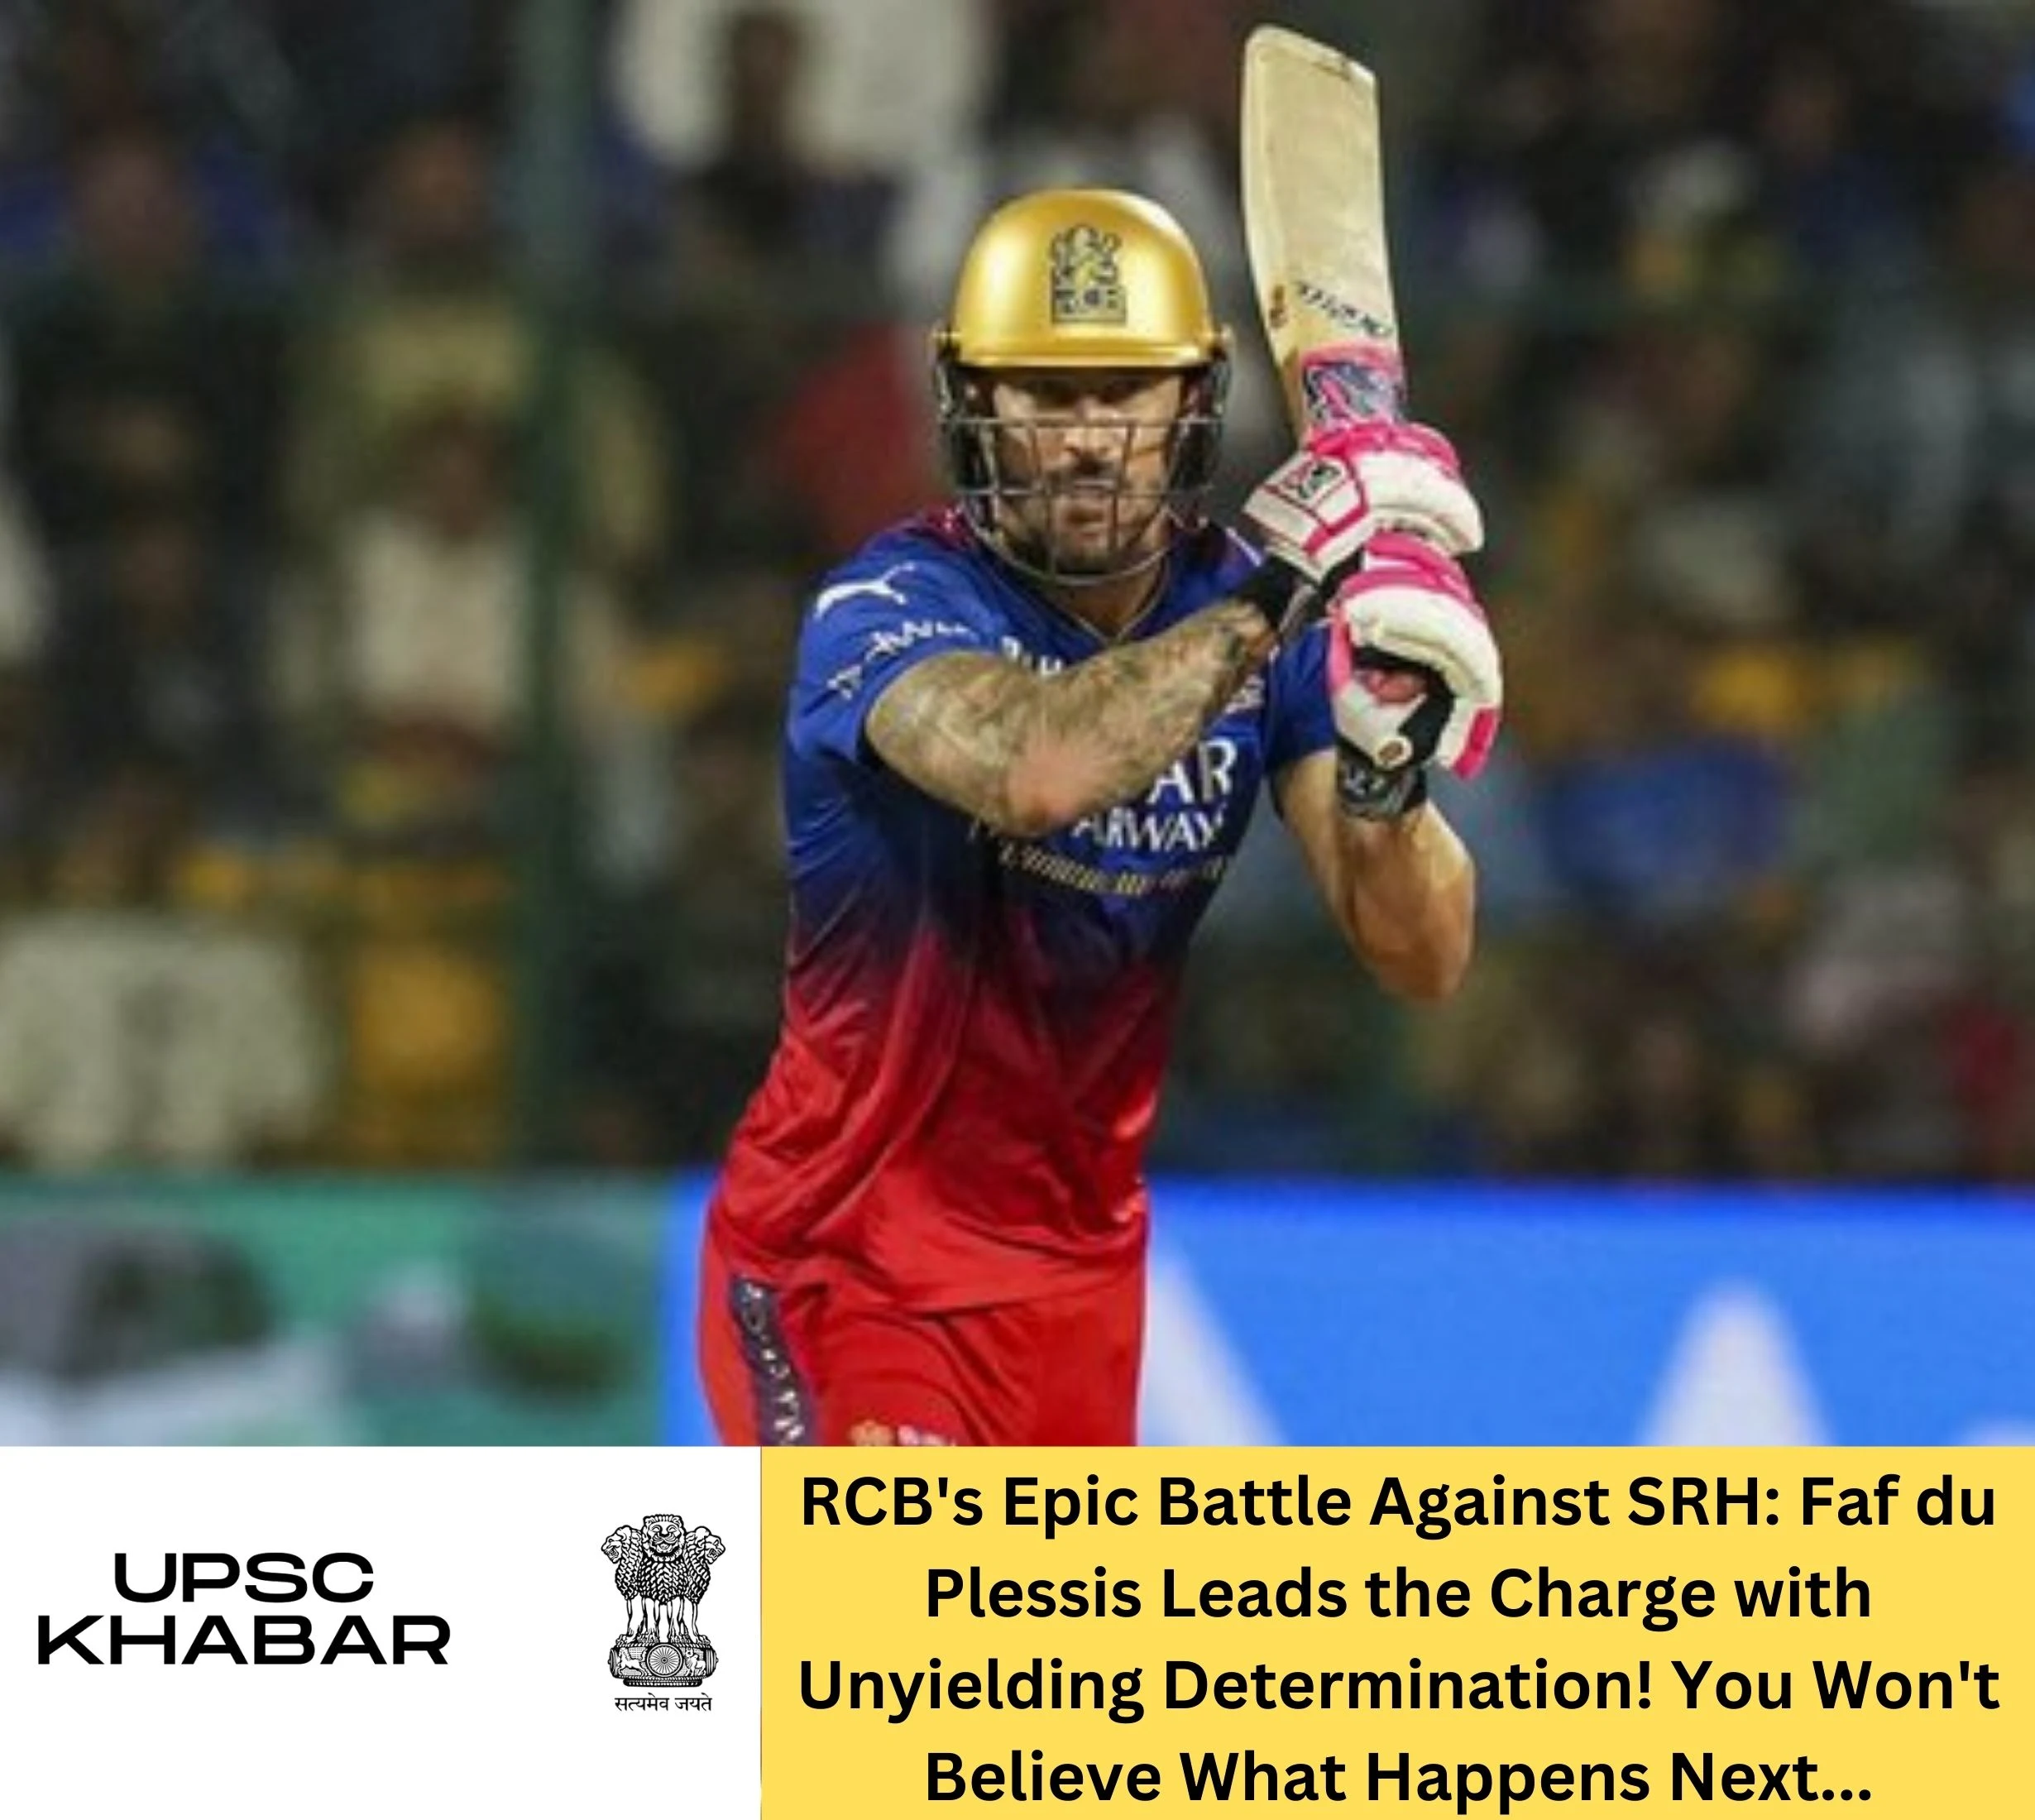 RCB's Epic Battle Against SRH: Faf du Plessis Leads the Charge with Unyielding Determination! You Won't Believe What Happens Next...